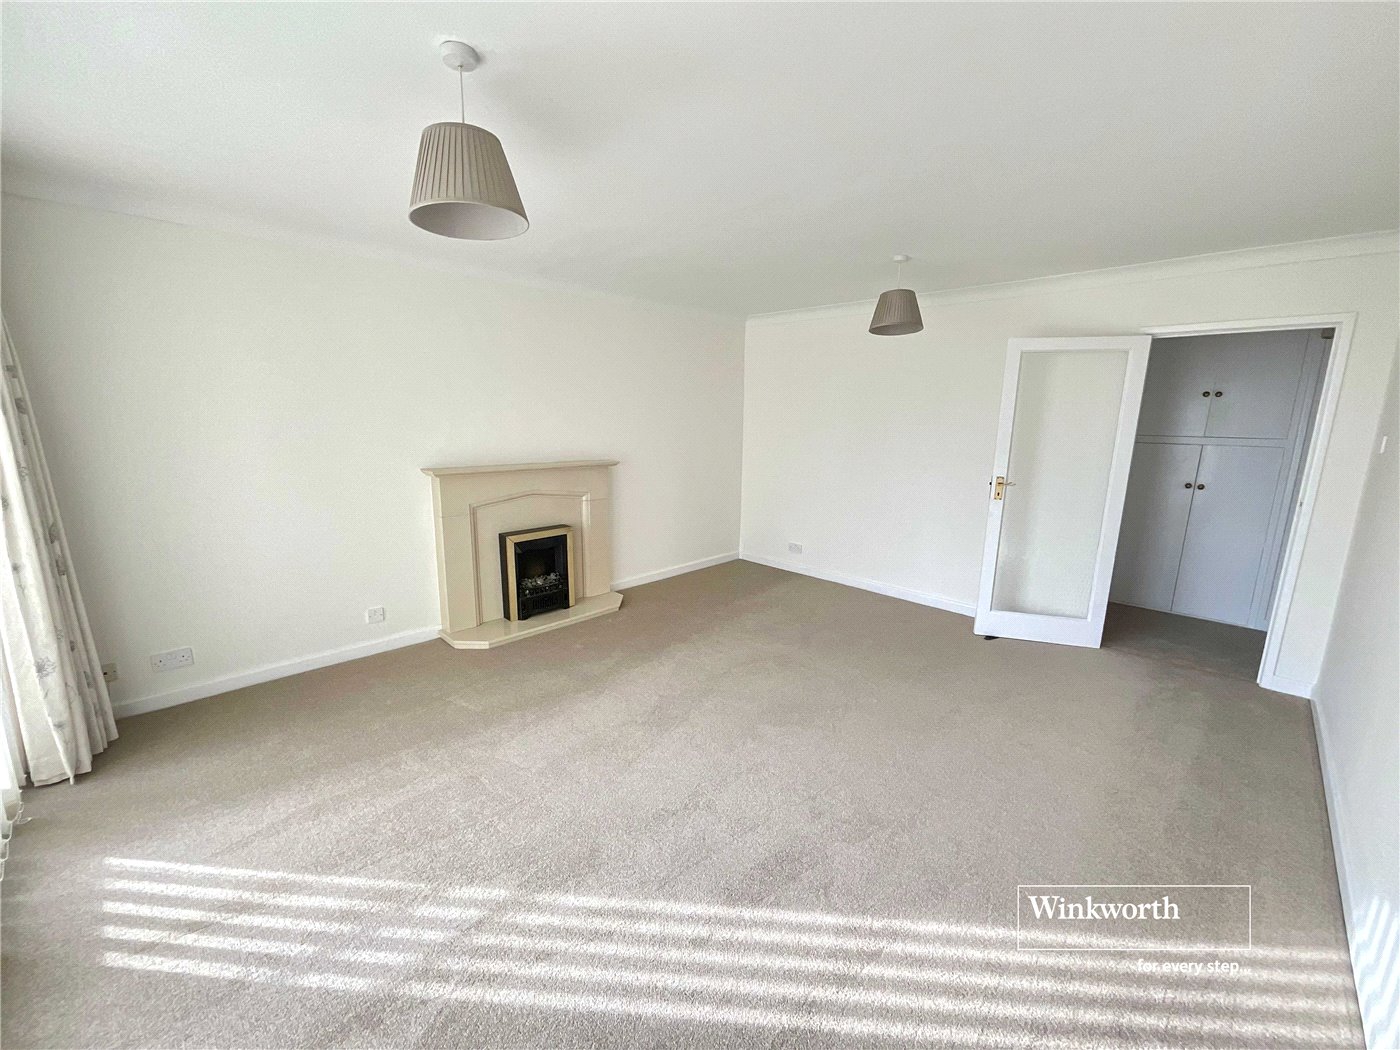 Exeter Court, 52 Wharncliffe Road, Highcliffe, Dorset, BH23